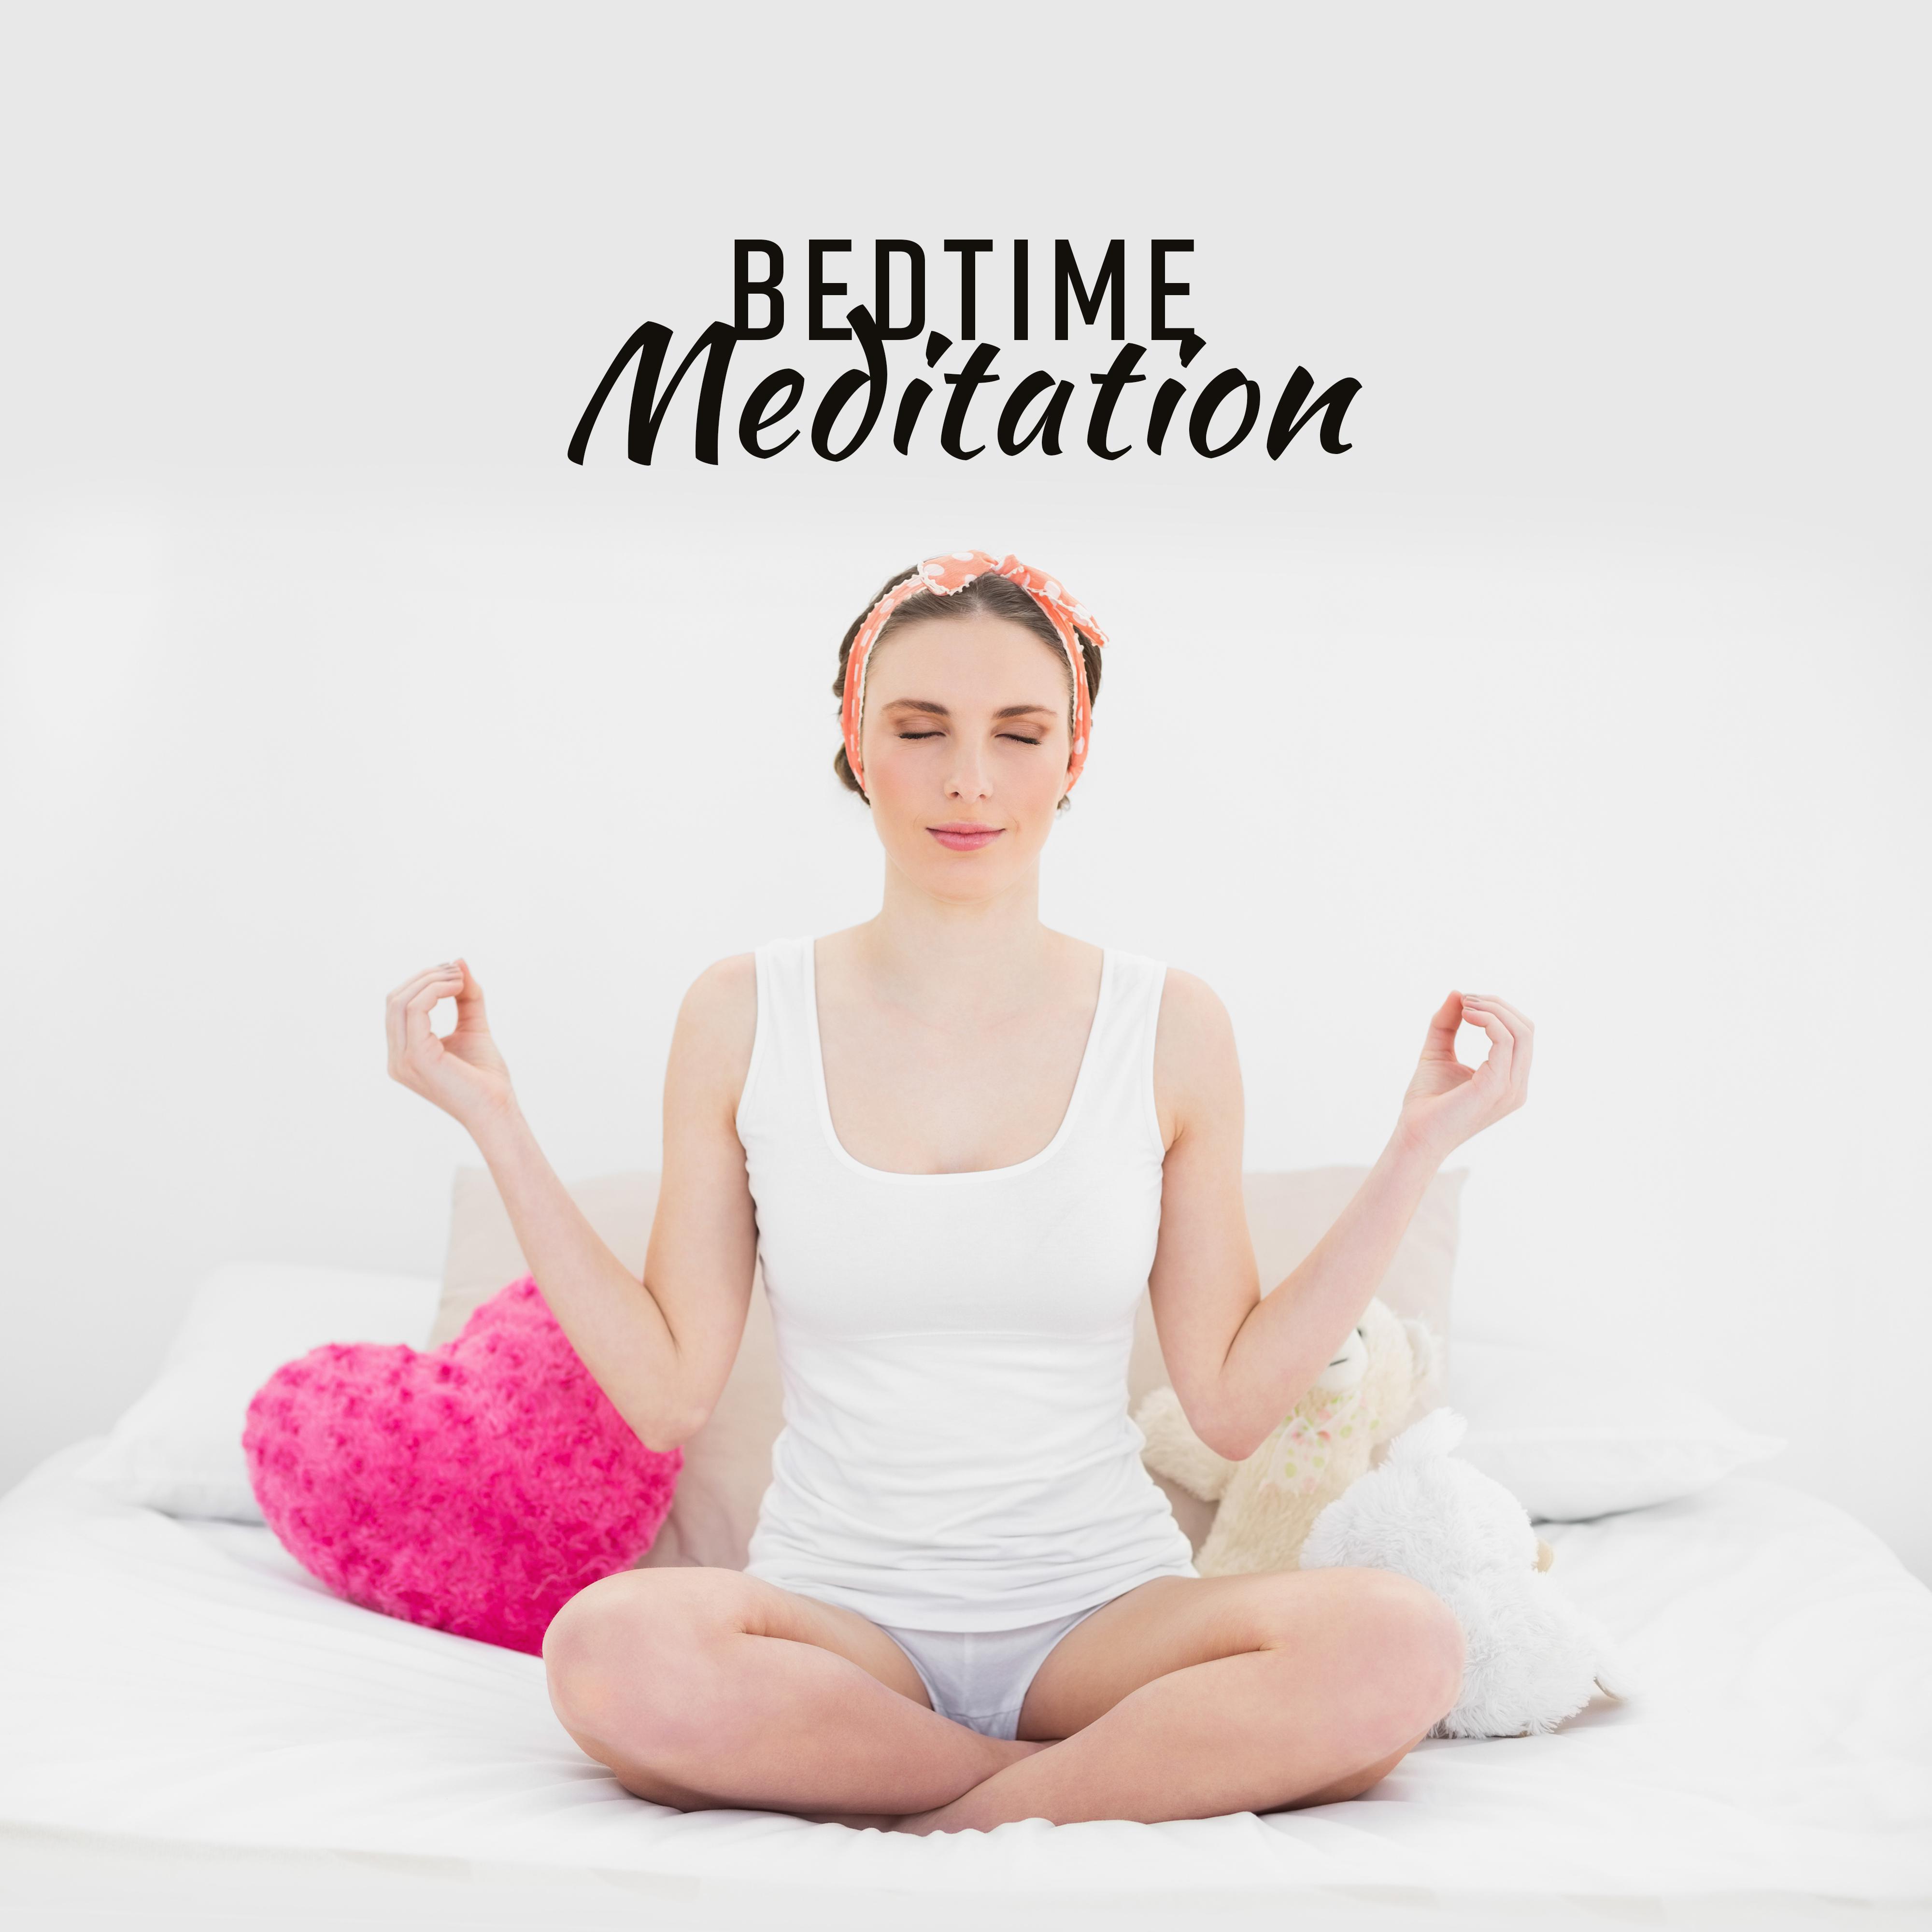 Bedtime Meditation: Attentive and Focused Meditation before Going to Sleep